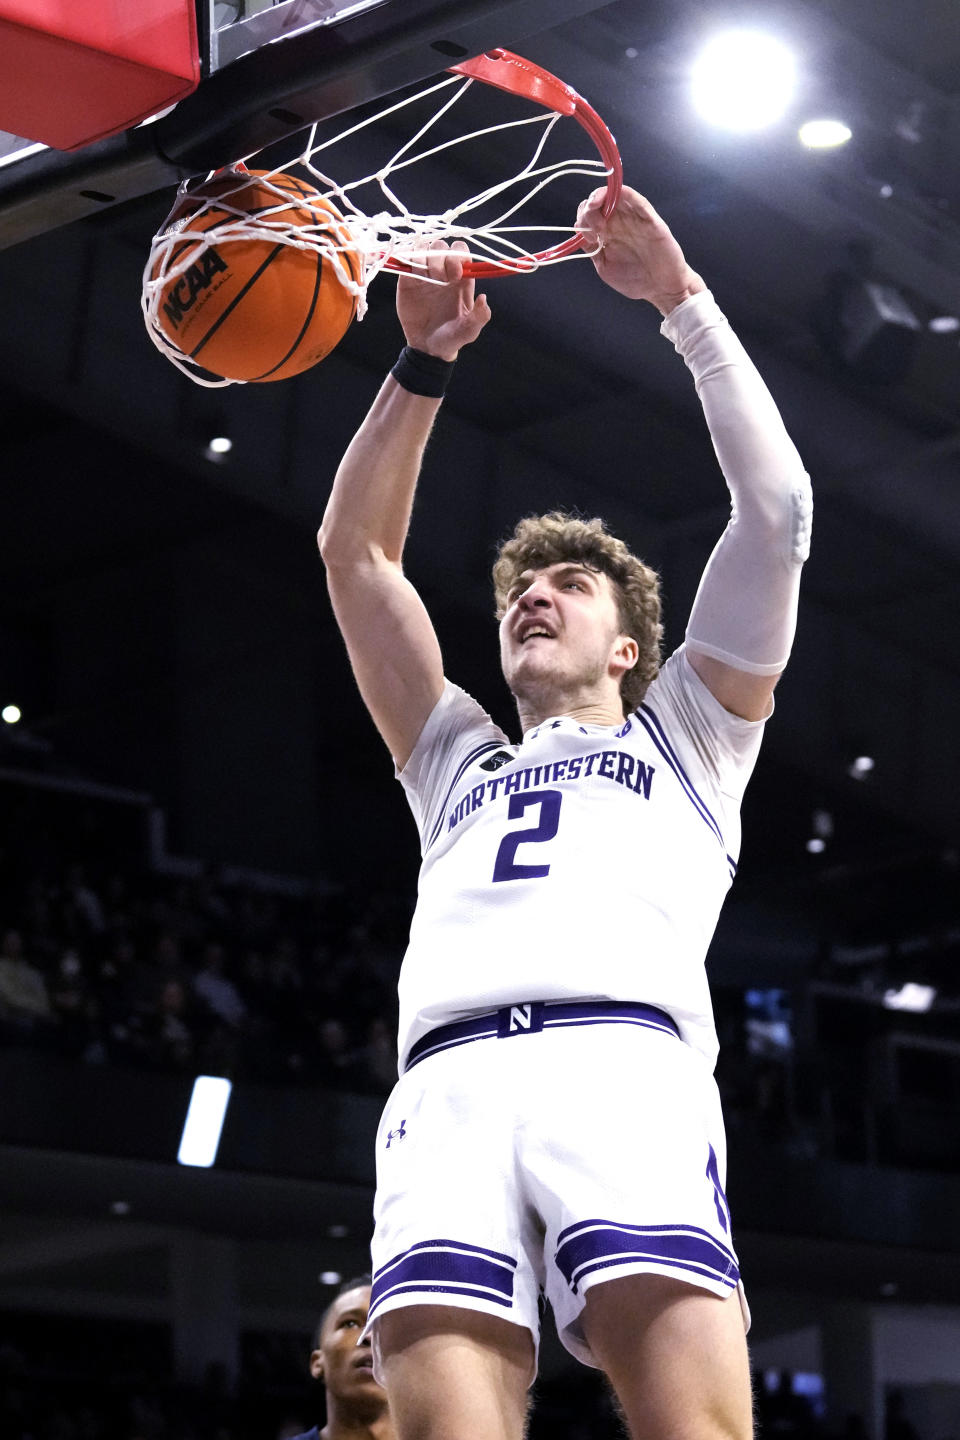 Northwestern forward Nick Martinelli hangs from the rim after dunking during the second half of an NCAA college basketball game against Penn State in Evanston, Ill., Sunday, Feb. 11, 2024. Northwestern won 68-63. (AP Photo/Nam Y. Huh)